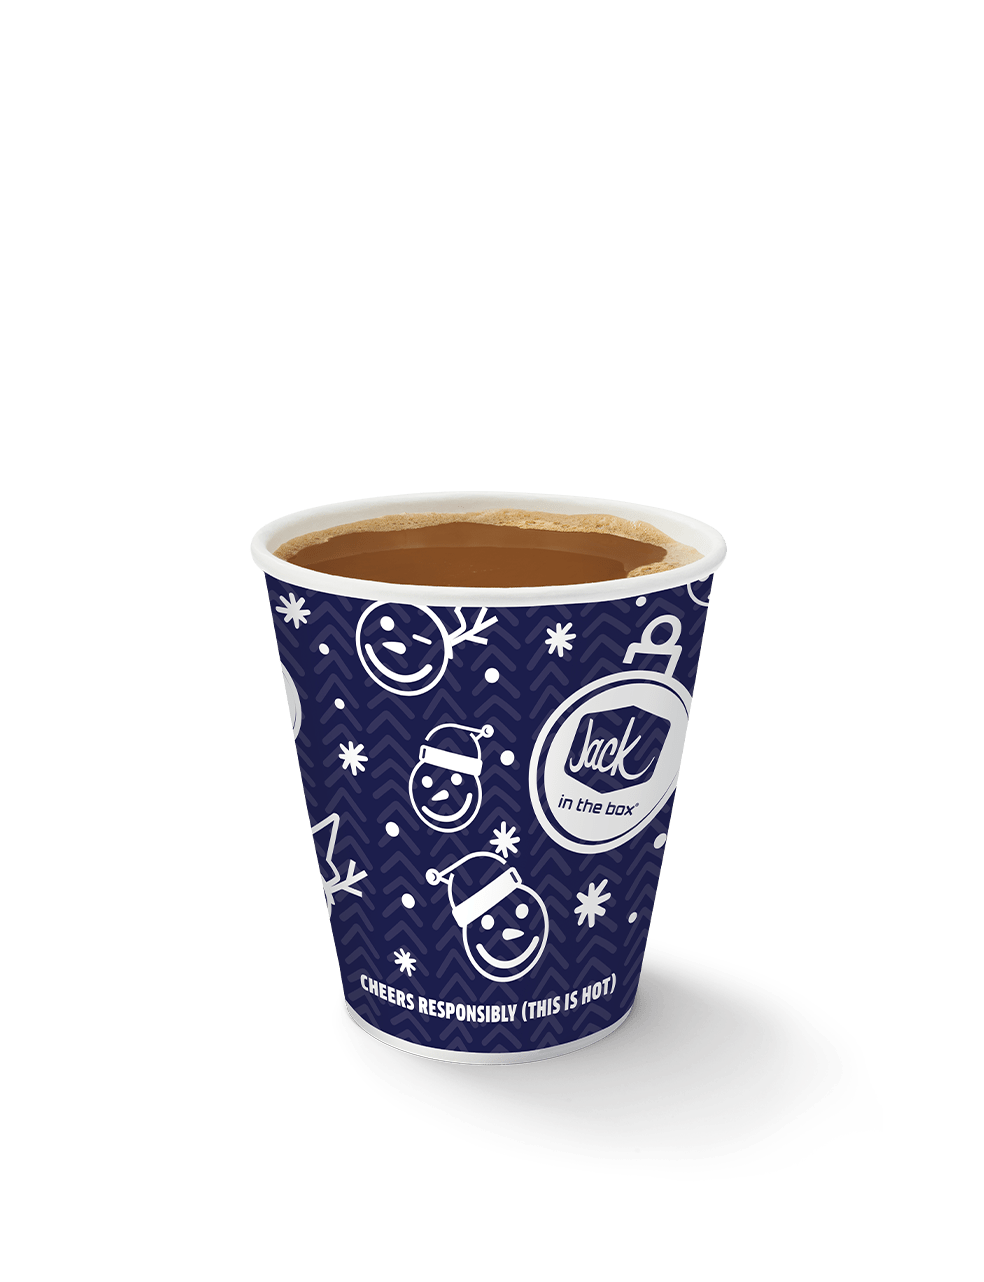 Jack in the Box Regular Salted Caramel Mocha Nutrition Facts